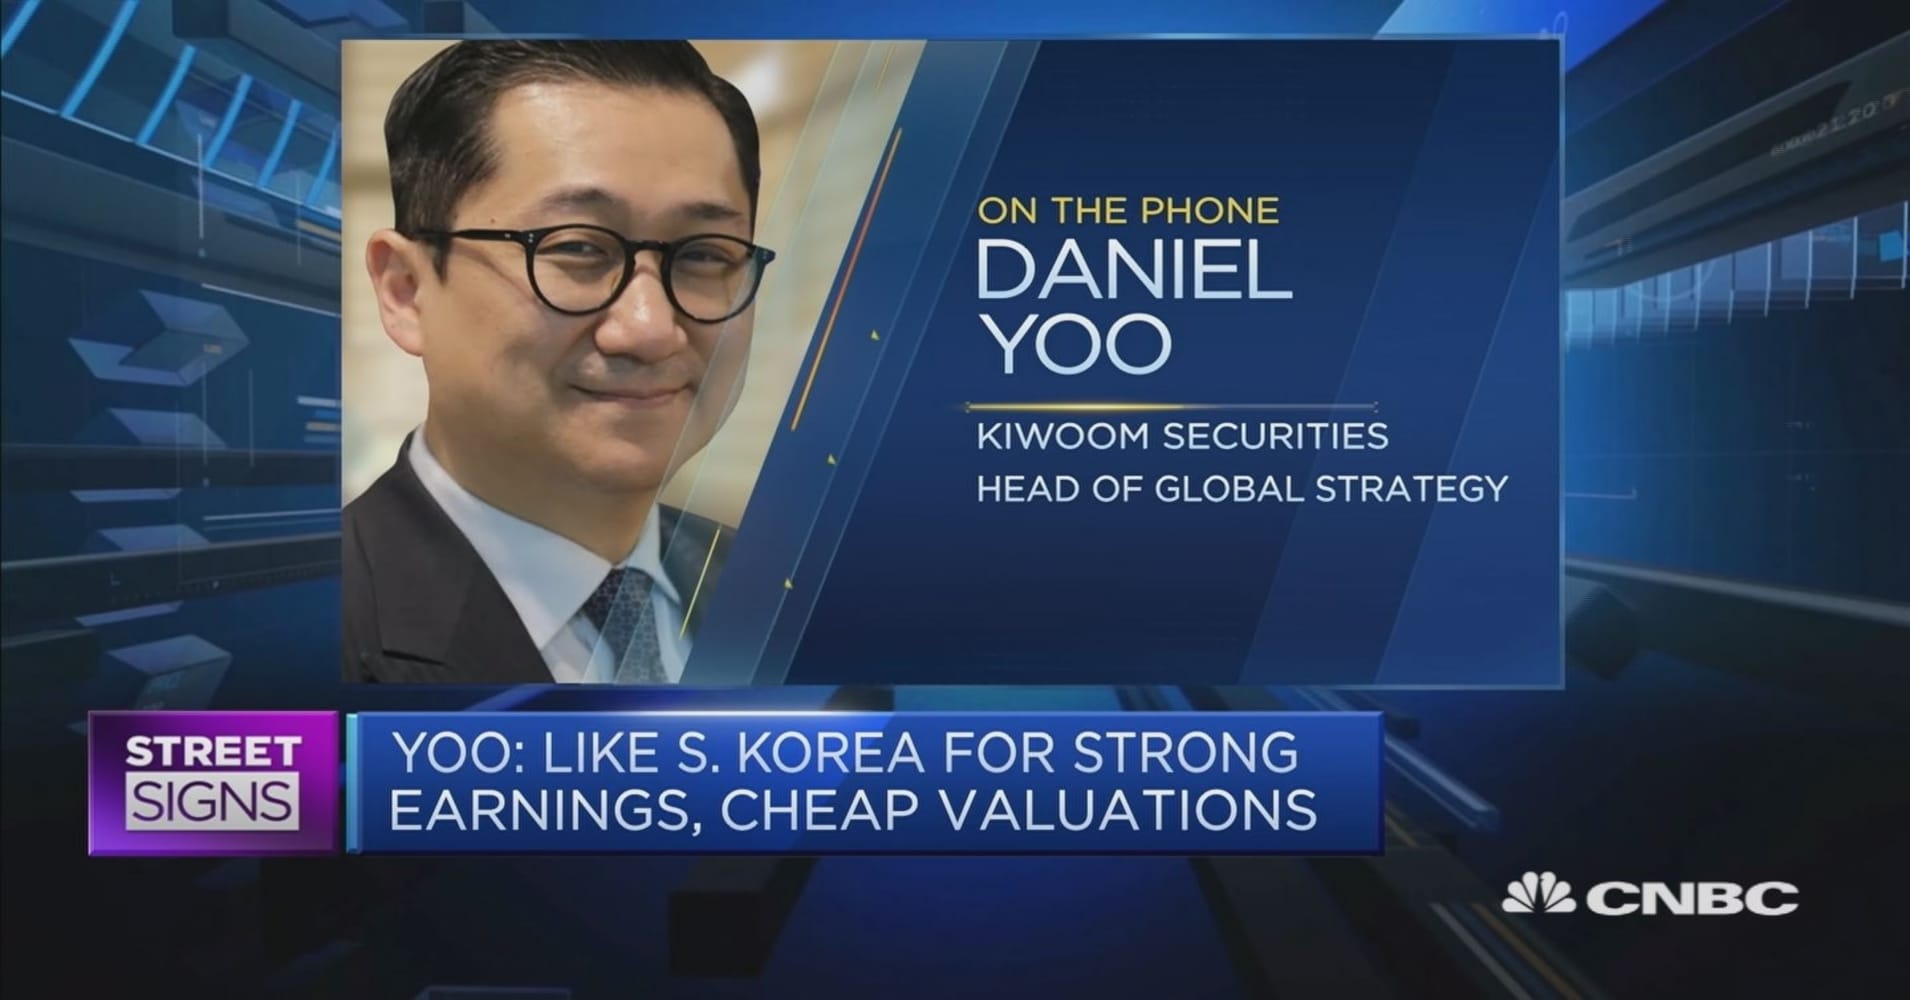 South Korea is a 'cheap market' going by valuations: Strategist